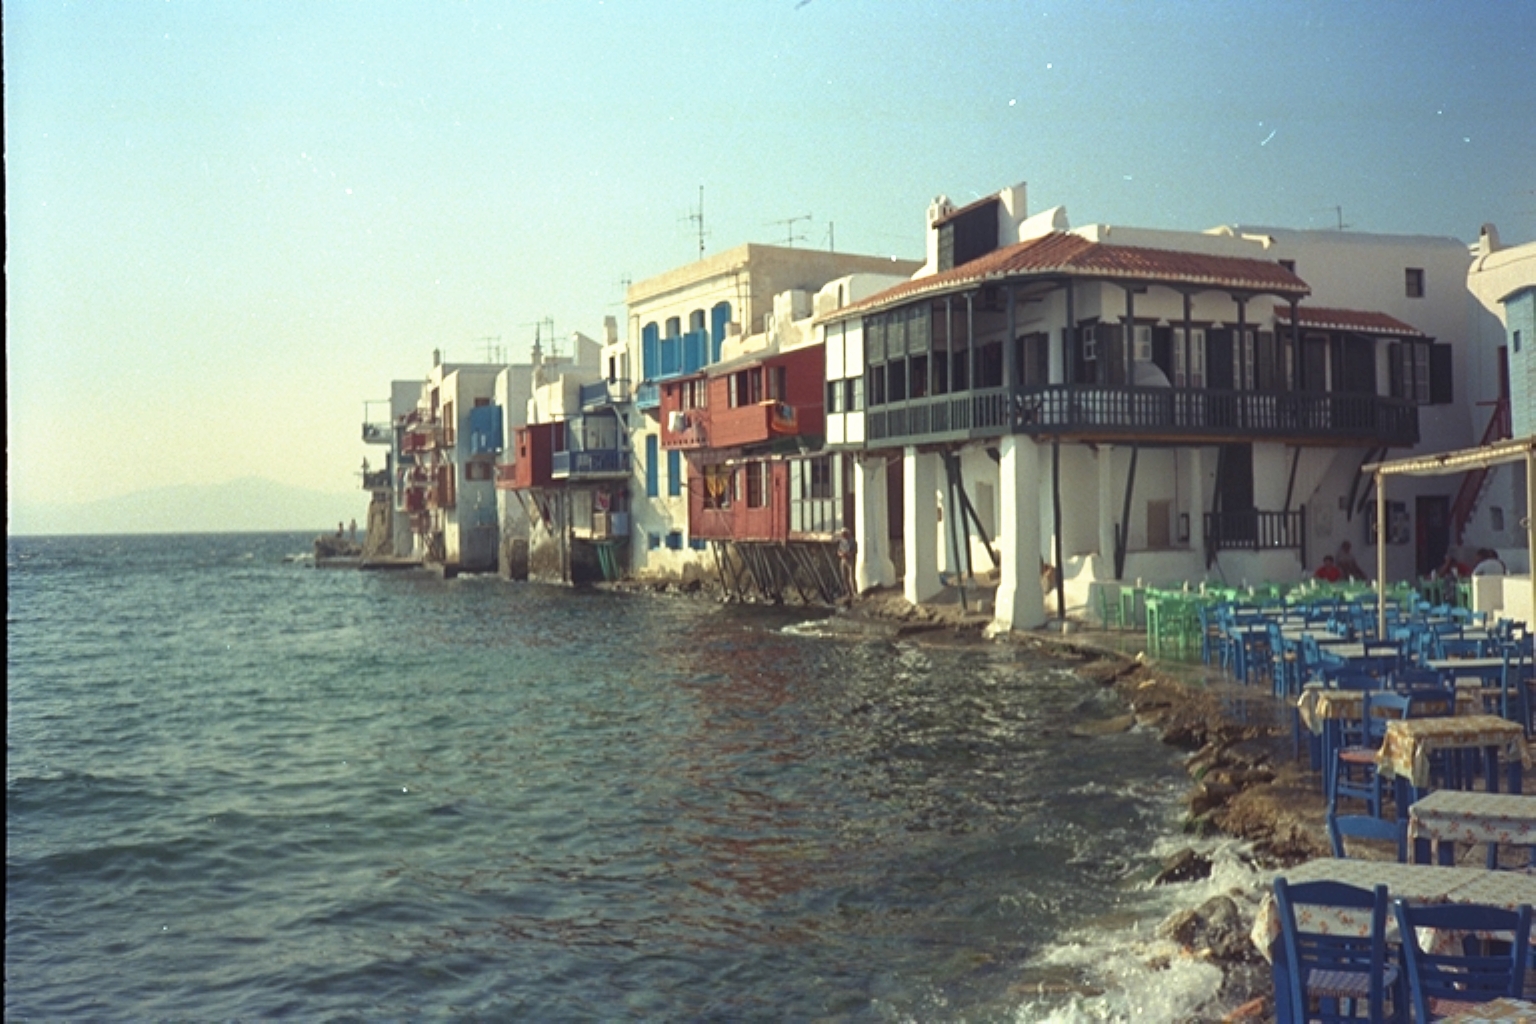 Pictures from Greece by otto leholt 1976-2023 